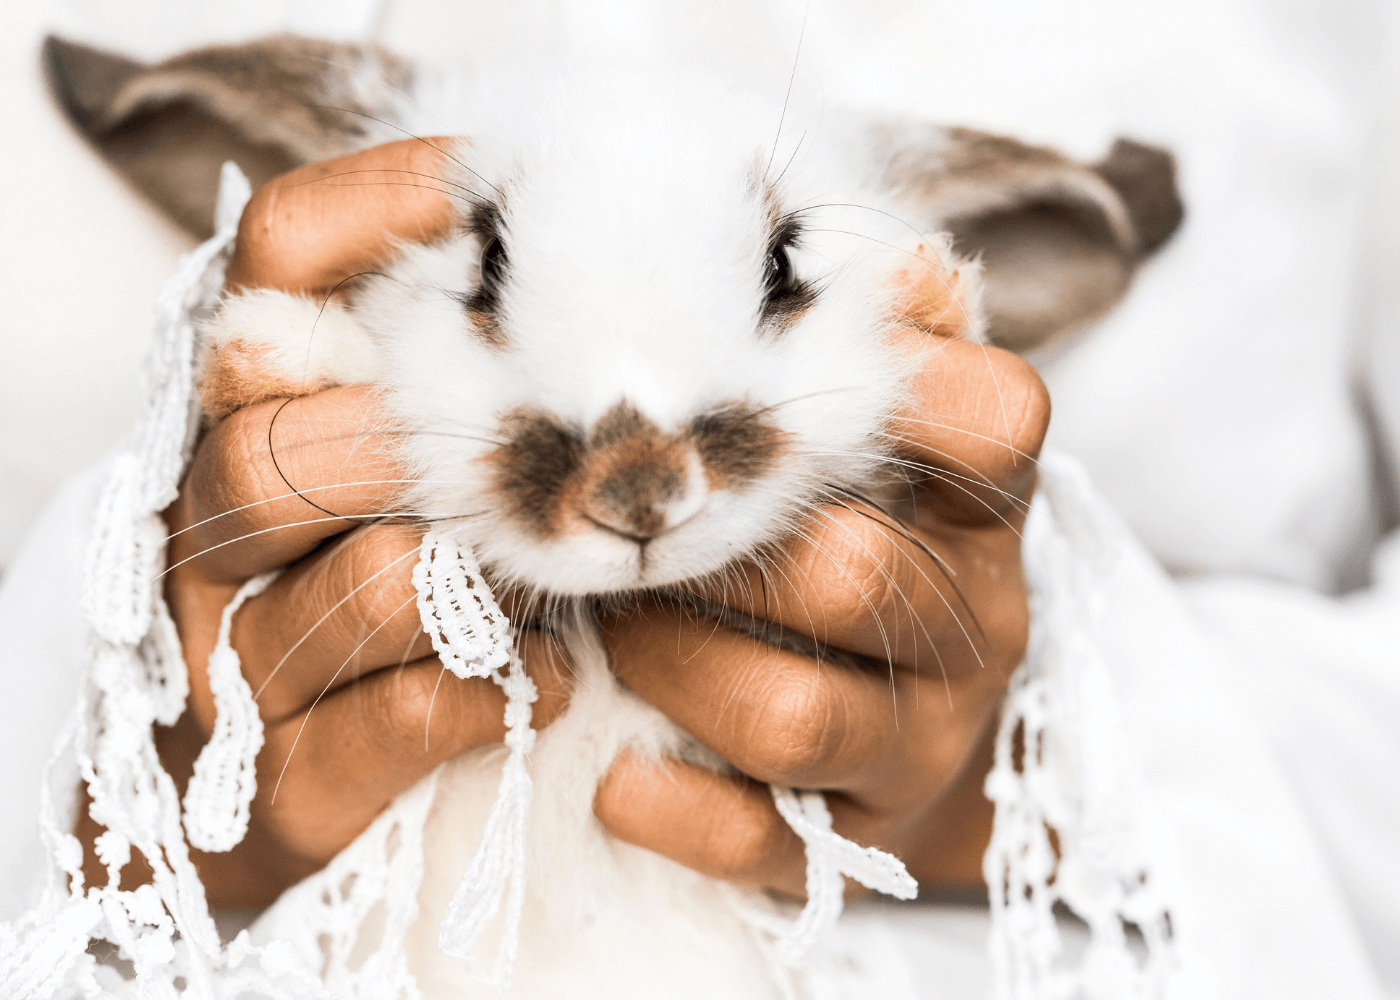 A Person Holding a Rabbit